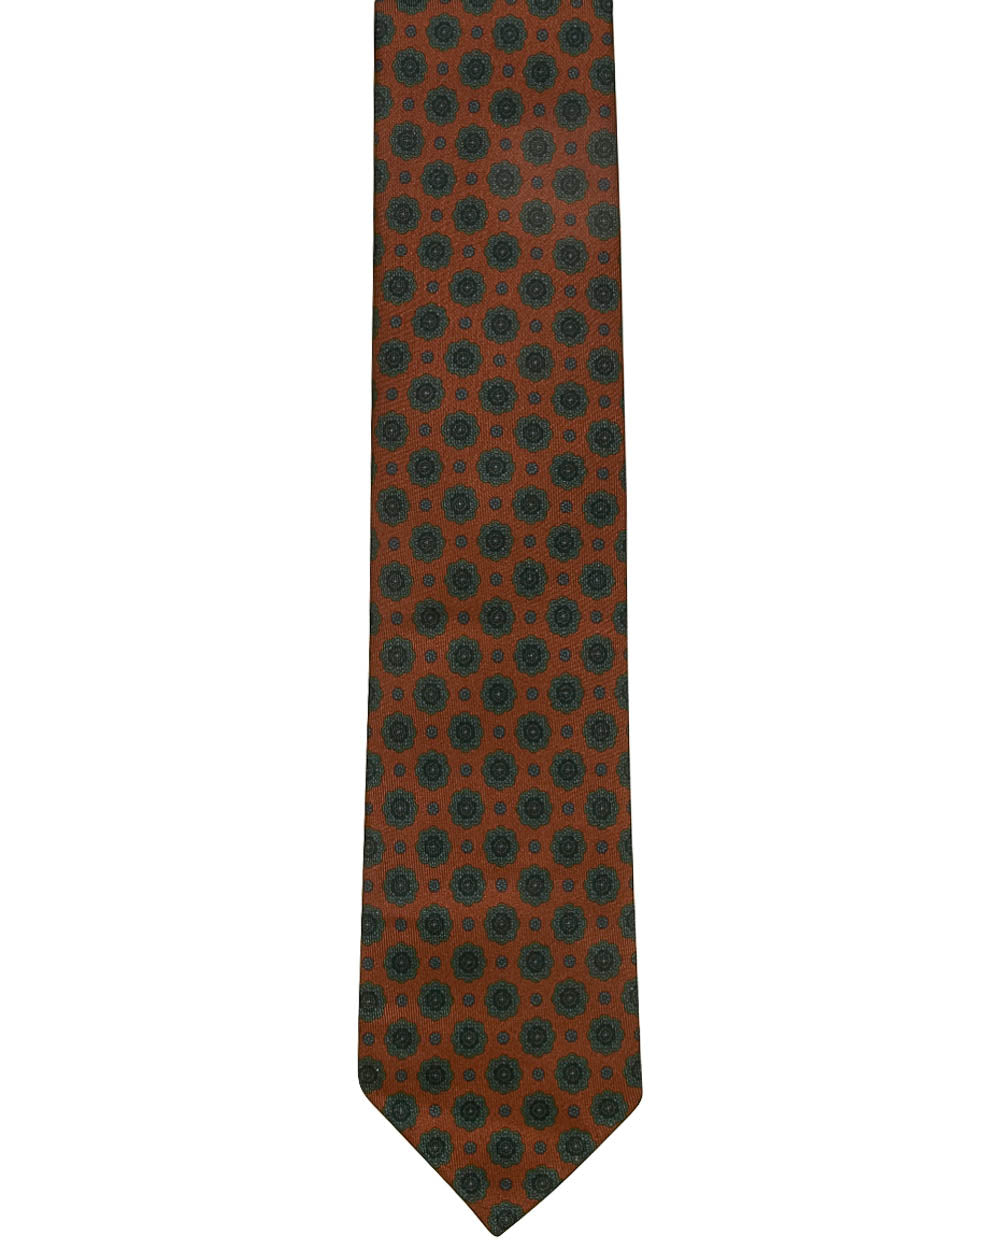 Rust with Teal Medallion Tie